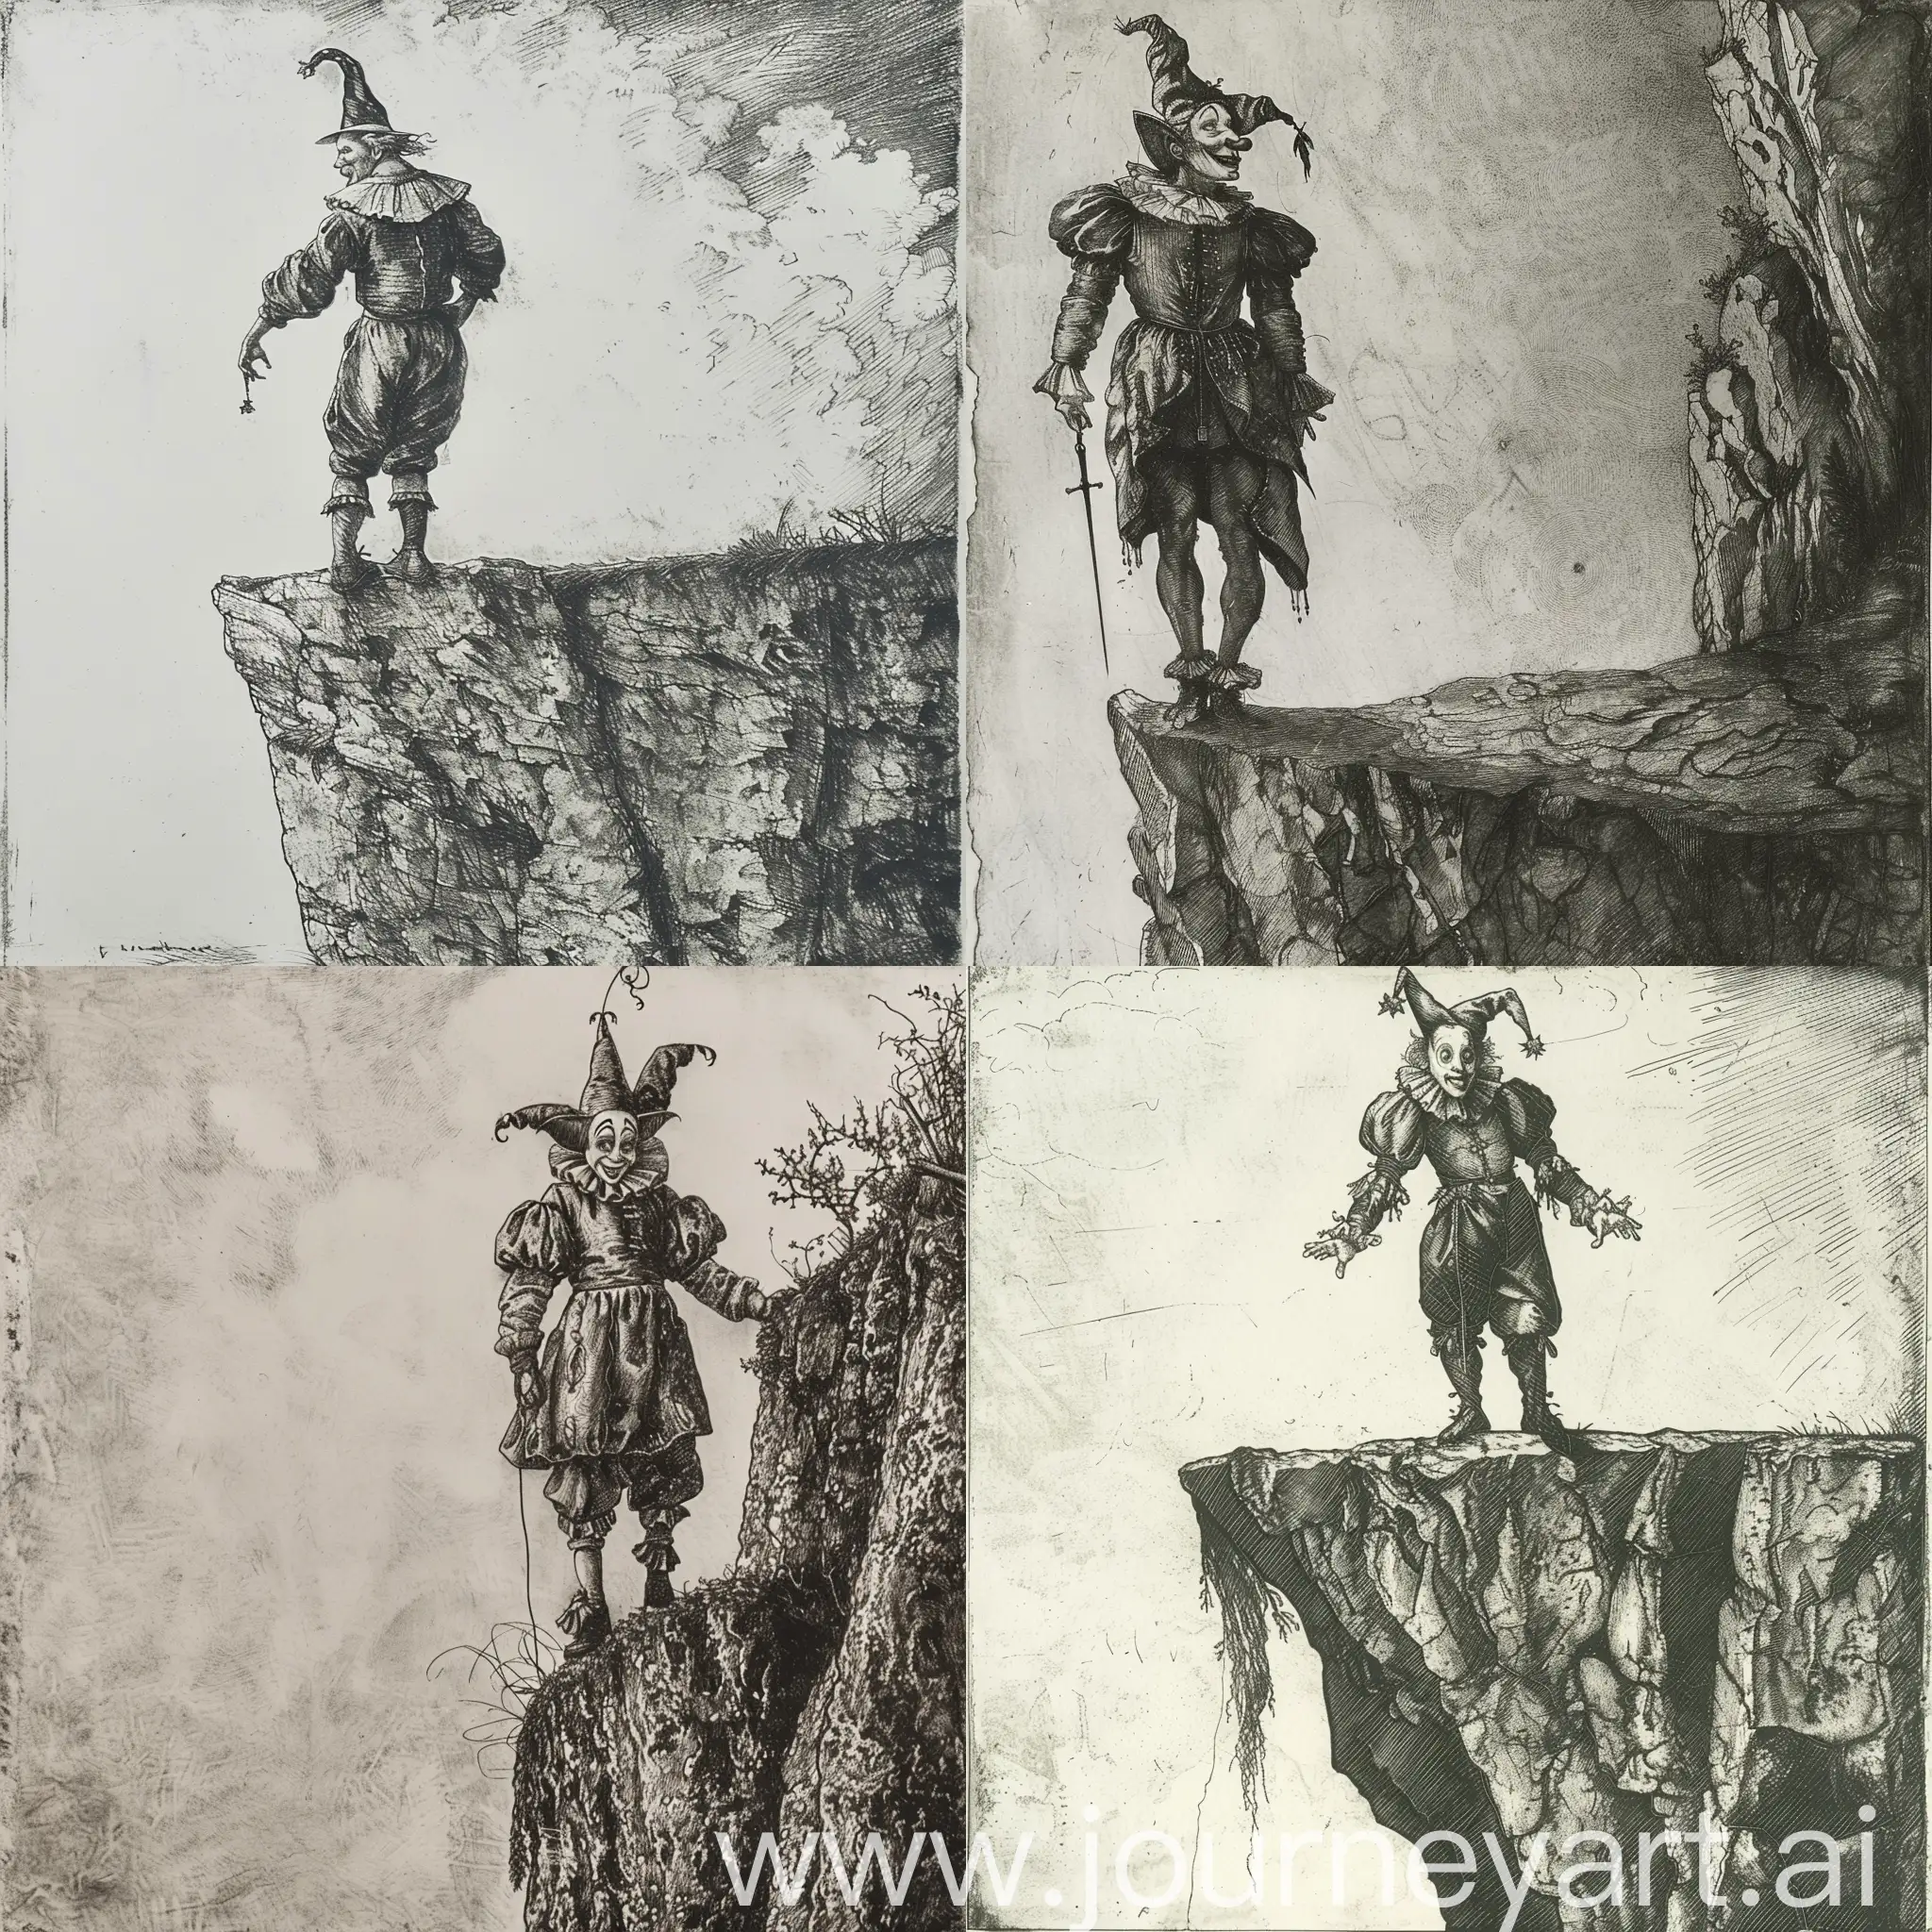 albrecht durer style etching of a court jester standing on the edge of a cliff, medieval style etching